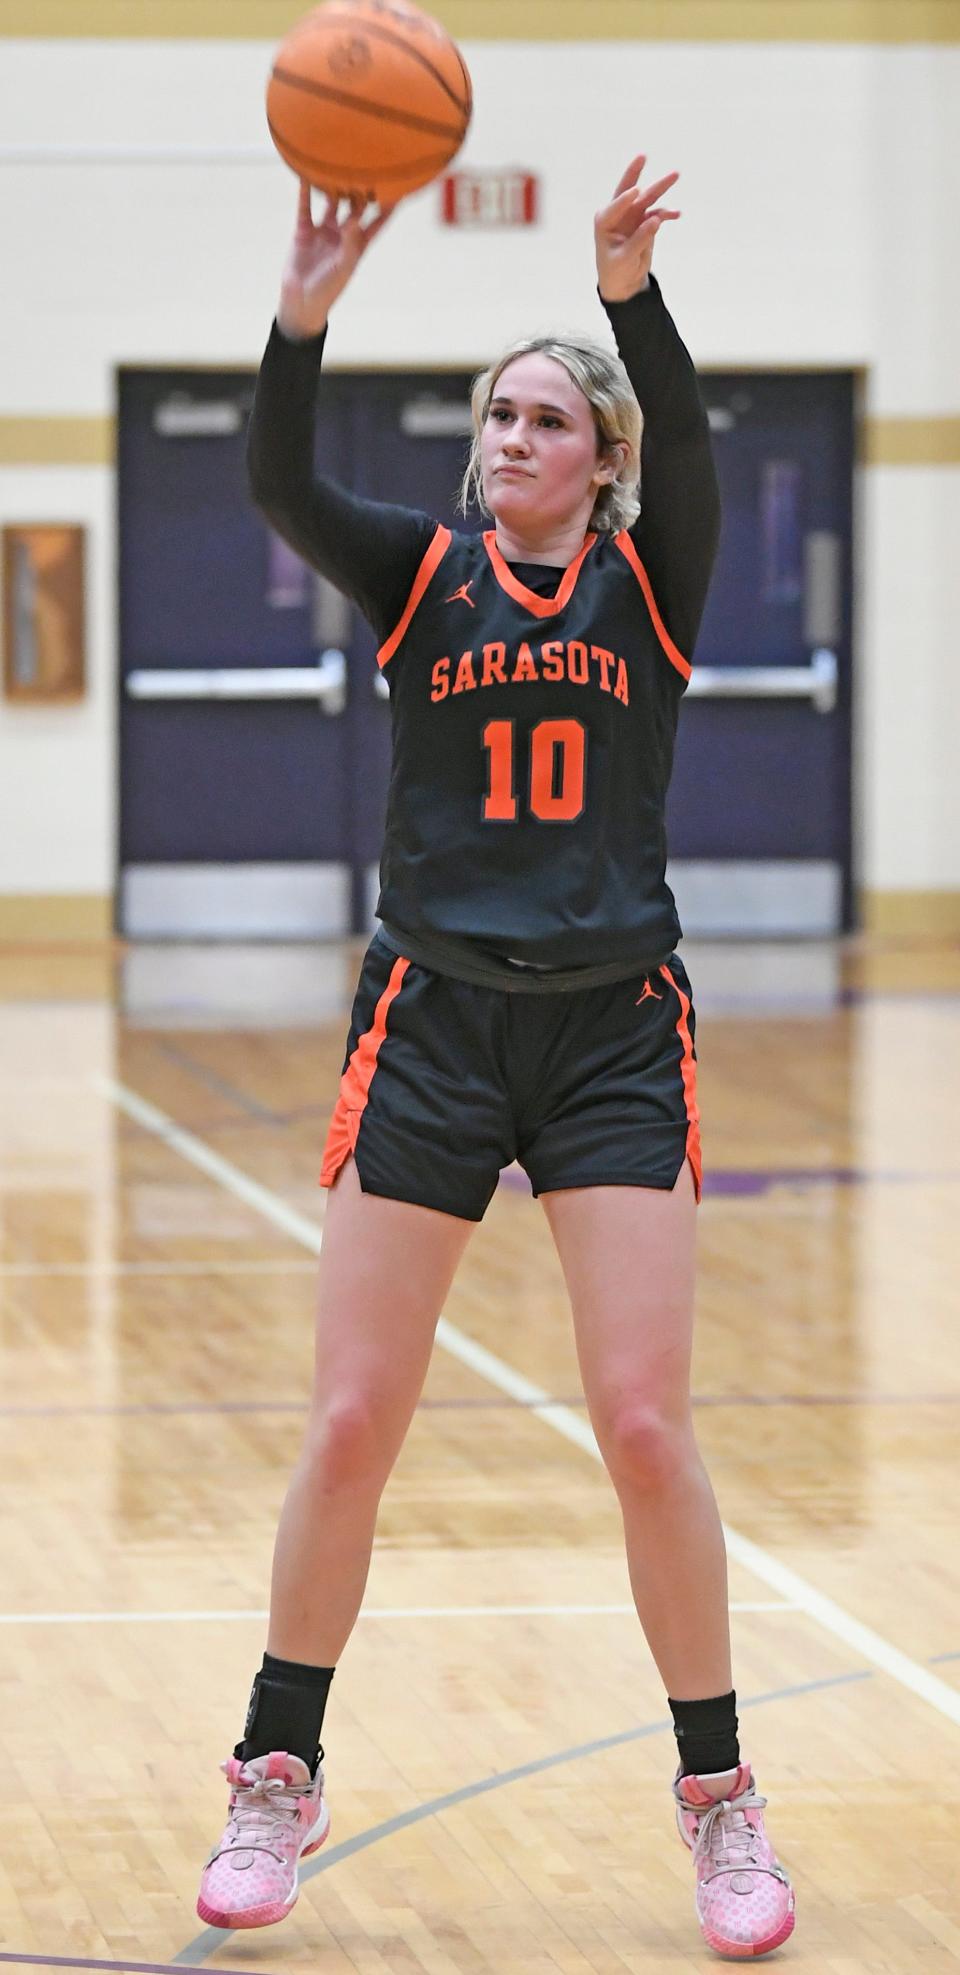 Sarasota High's Kennedy McClain is, according to her coach, Radhika Miller, one of the best set shooters she's ever seen.